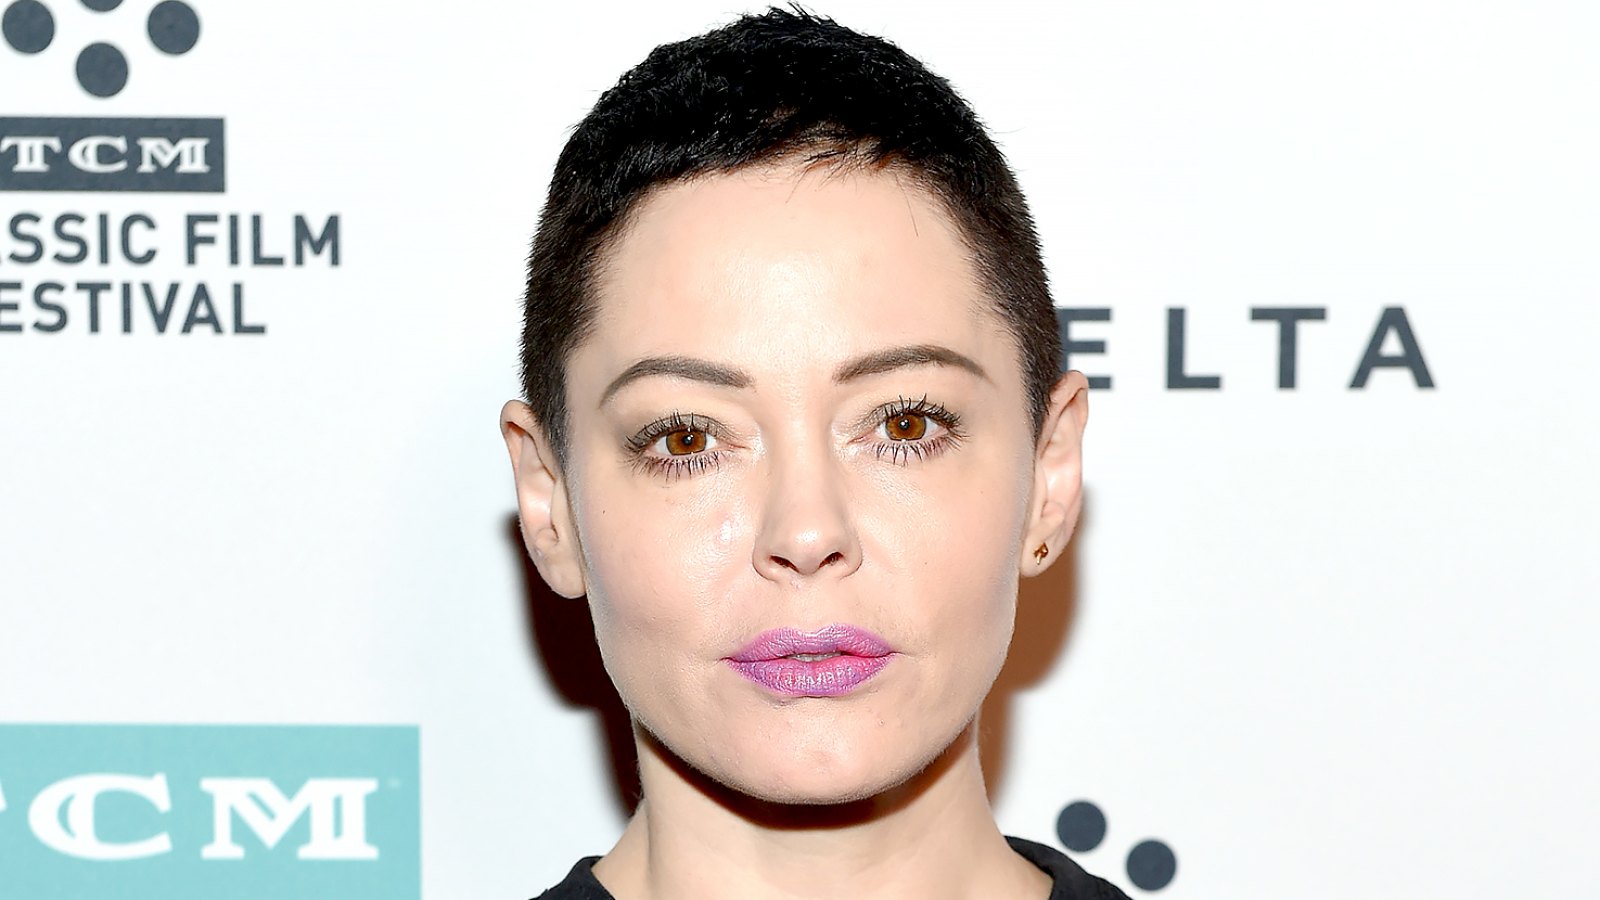 Rose McGowan attends the screening of 'Lady in the Dark' during the 2017 TCM Classic Film Festival on April 9, 2017 in Los Angeles, California.